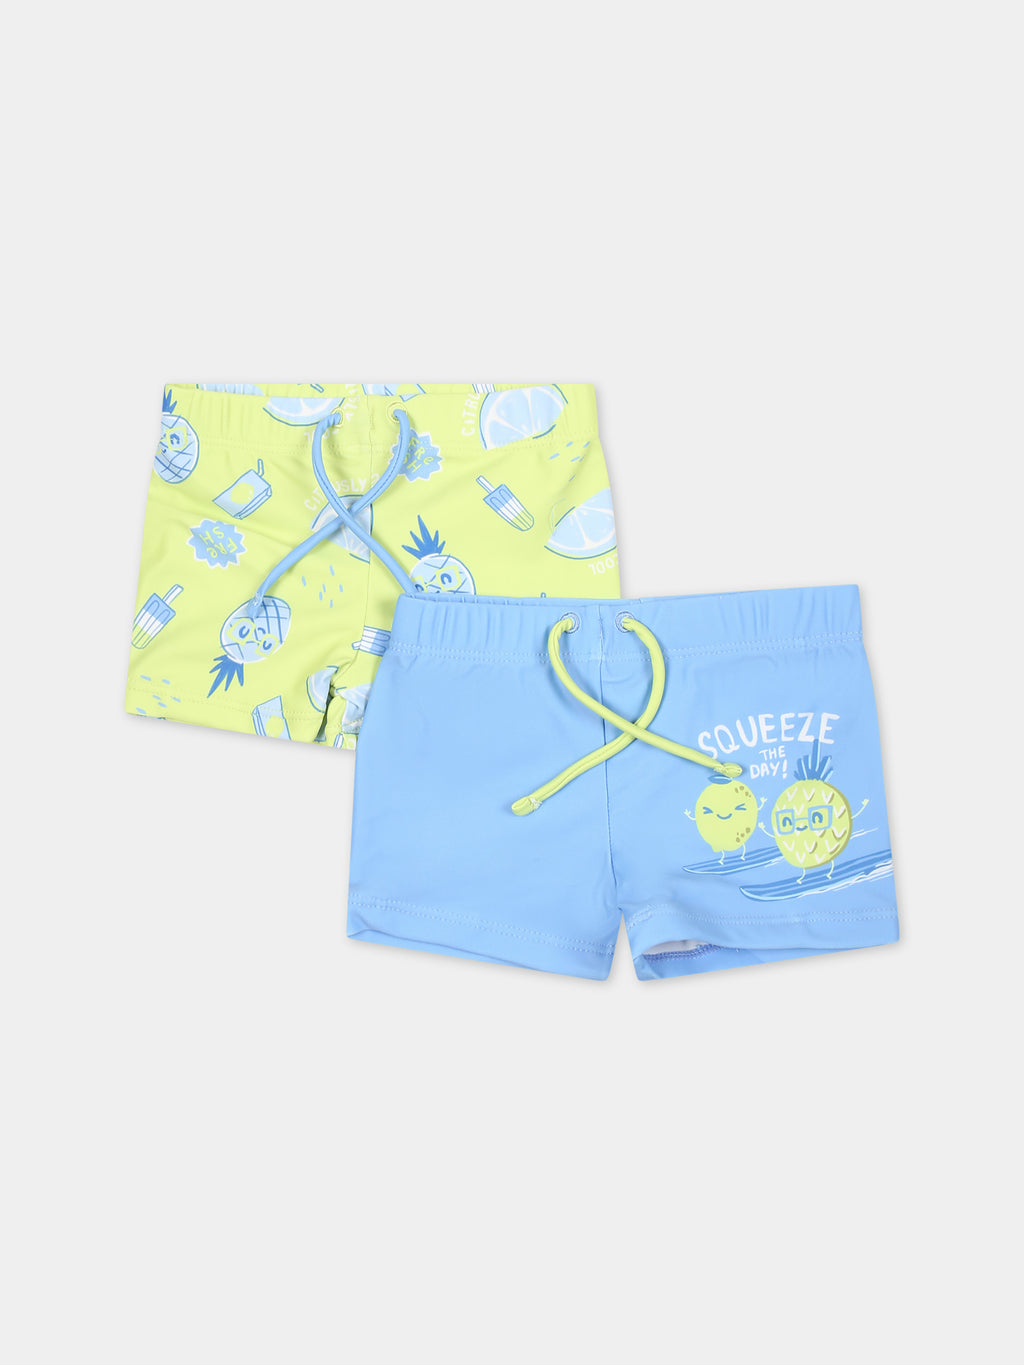 Multicolor set for baby boy with fruit print